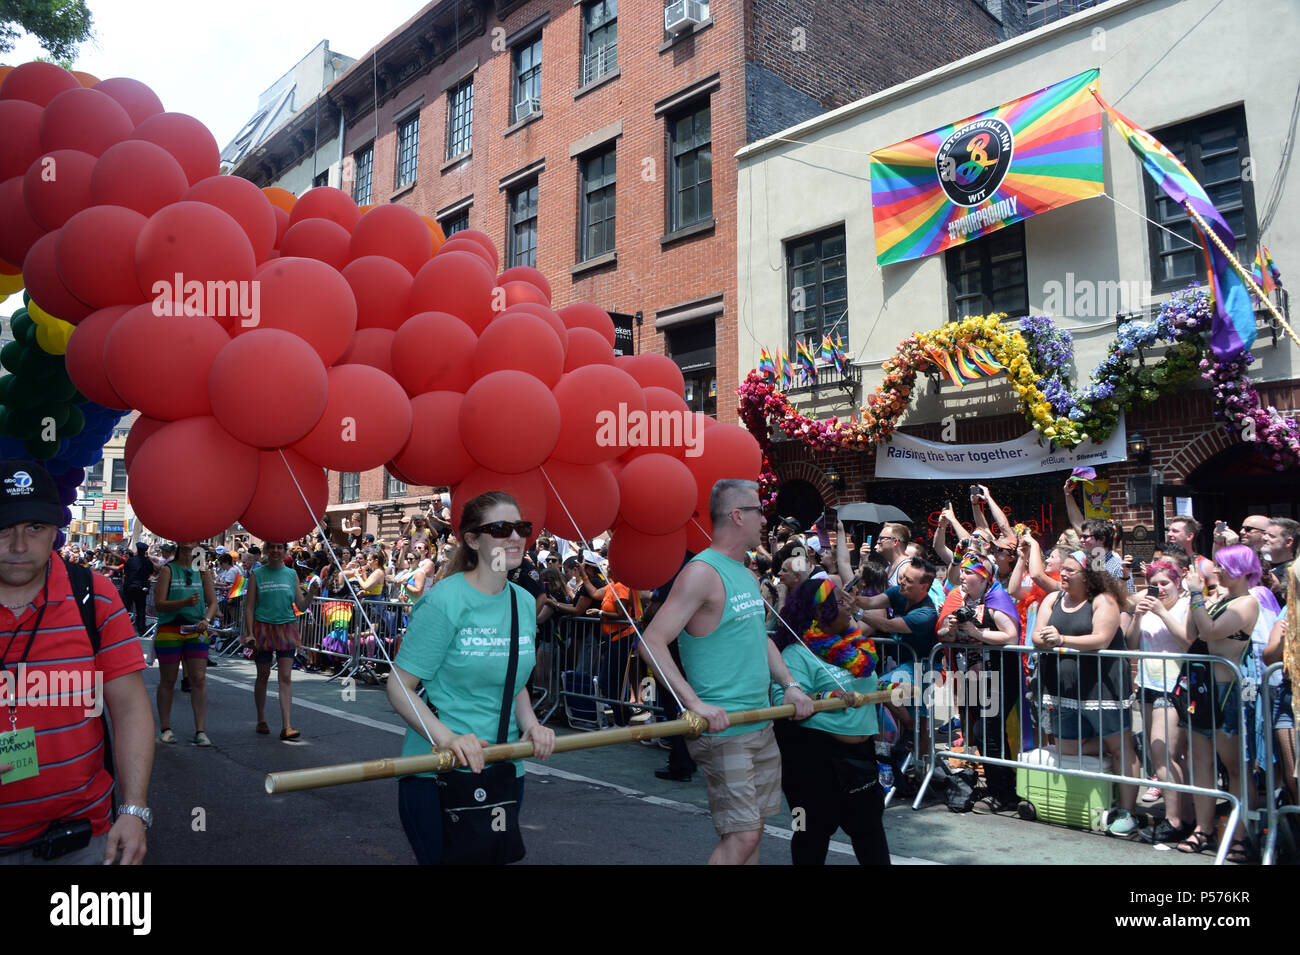 NEW YORK JUNE 24: Atmosphere arrives to the NYC Pride March on June 24, 2018 in New York City. People: Atmosphere Credit: Hoo-me.com/MediaPunch Stock Photo